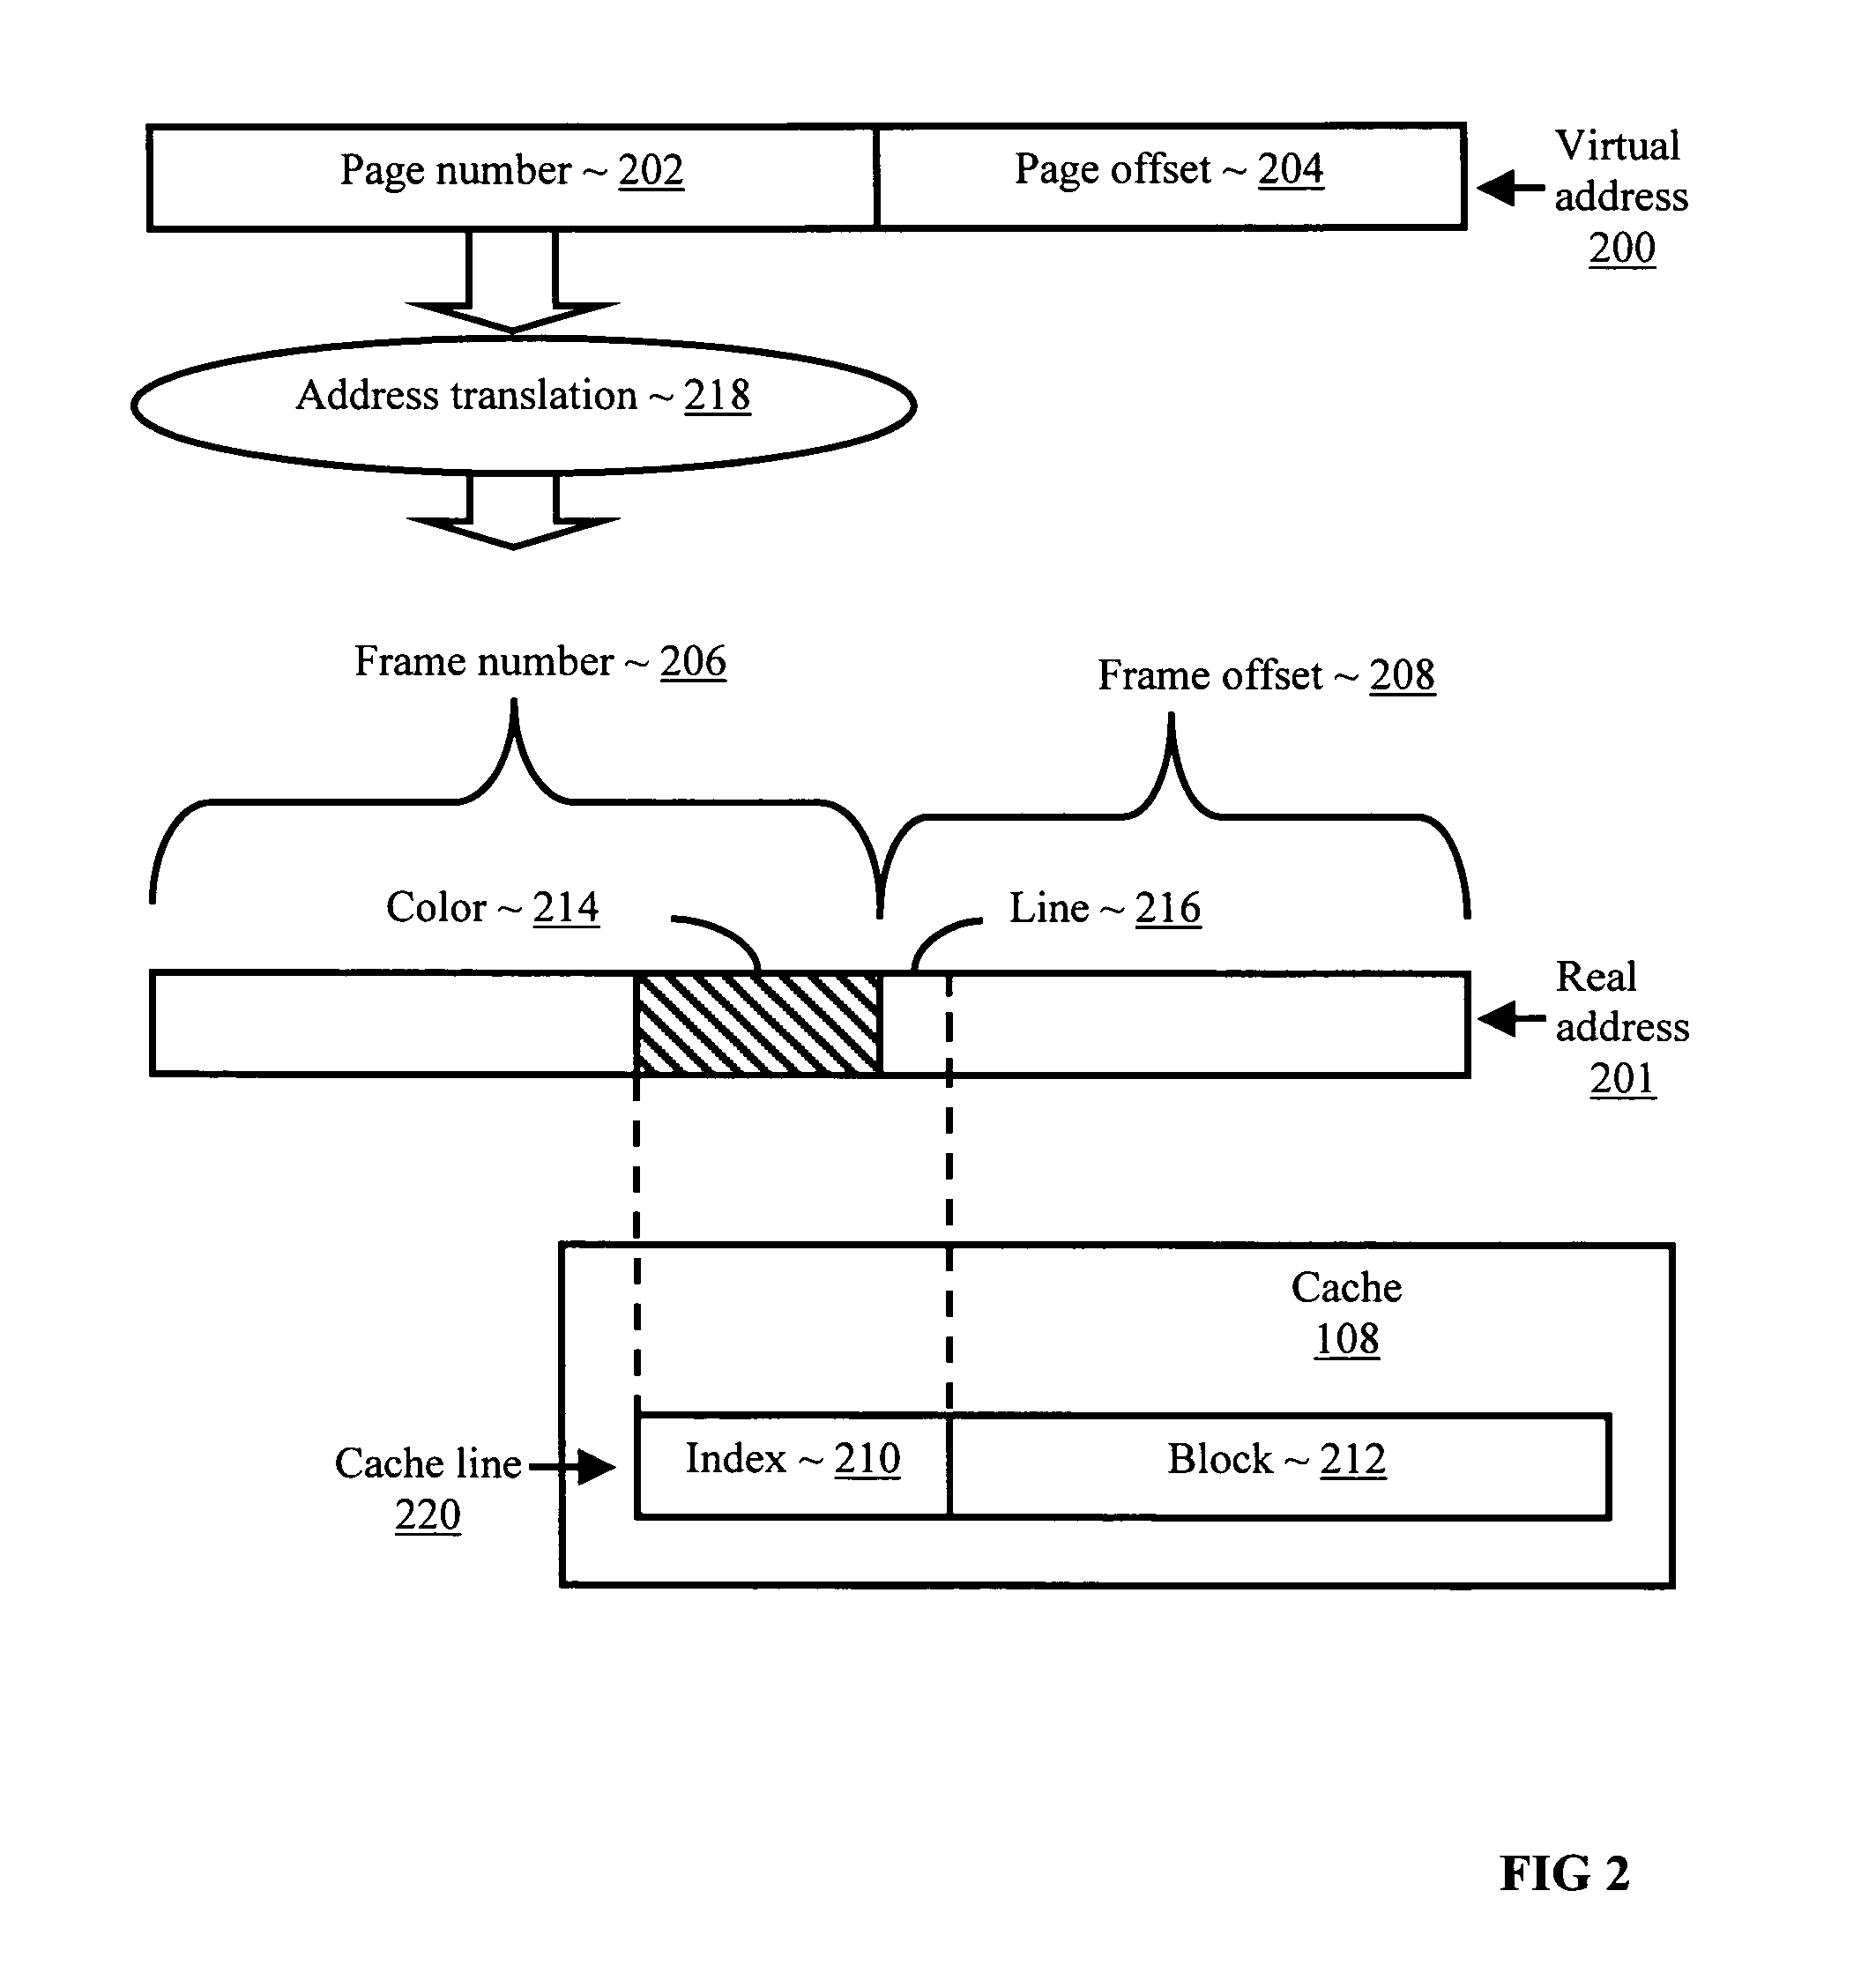 Memory mapping to reduce cache conflicts in multiprocessor systems